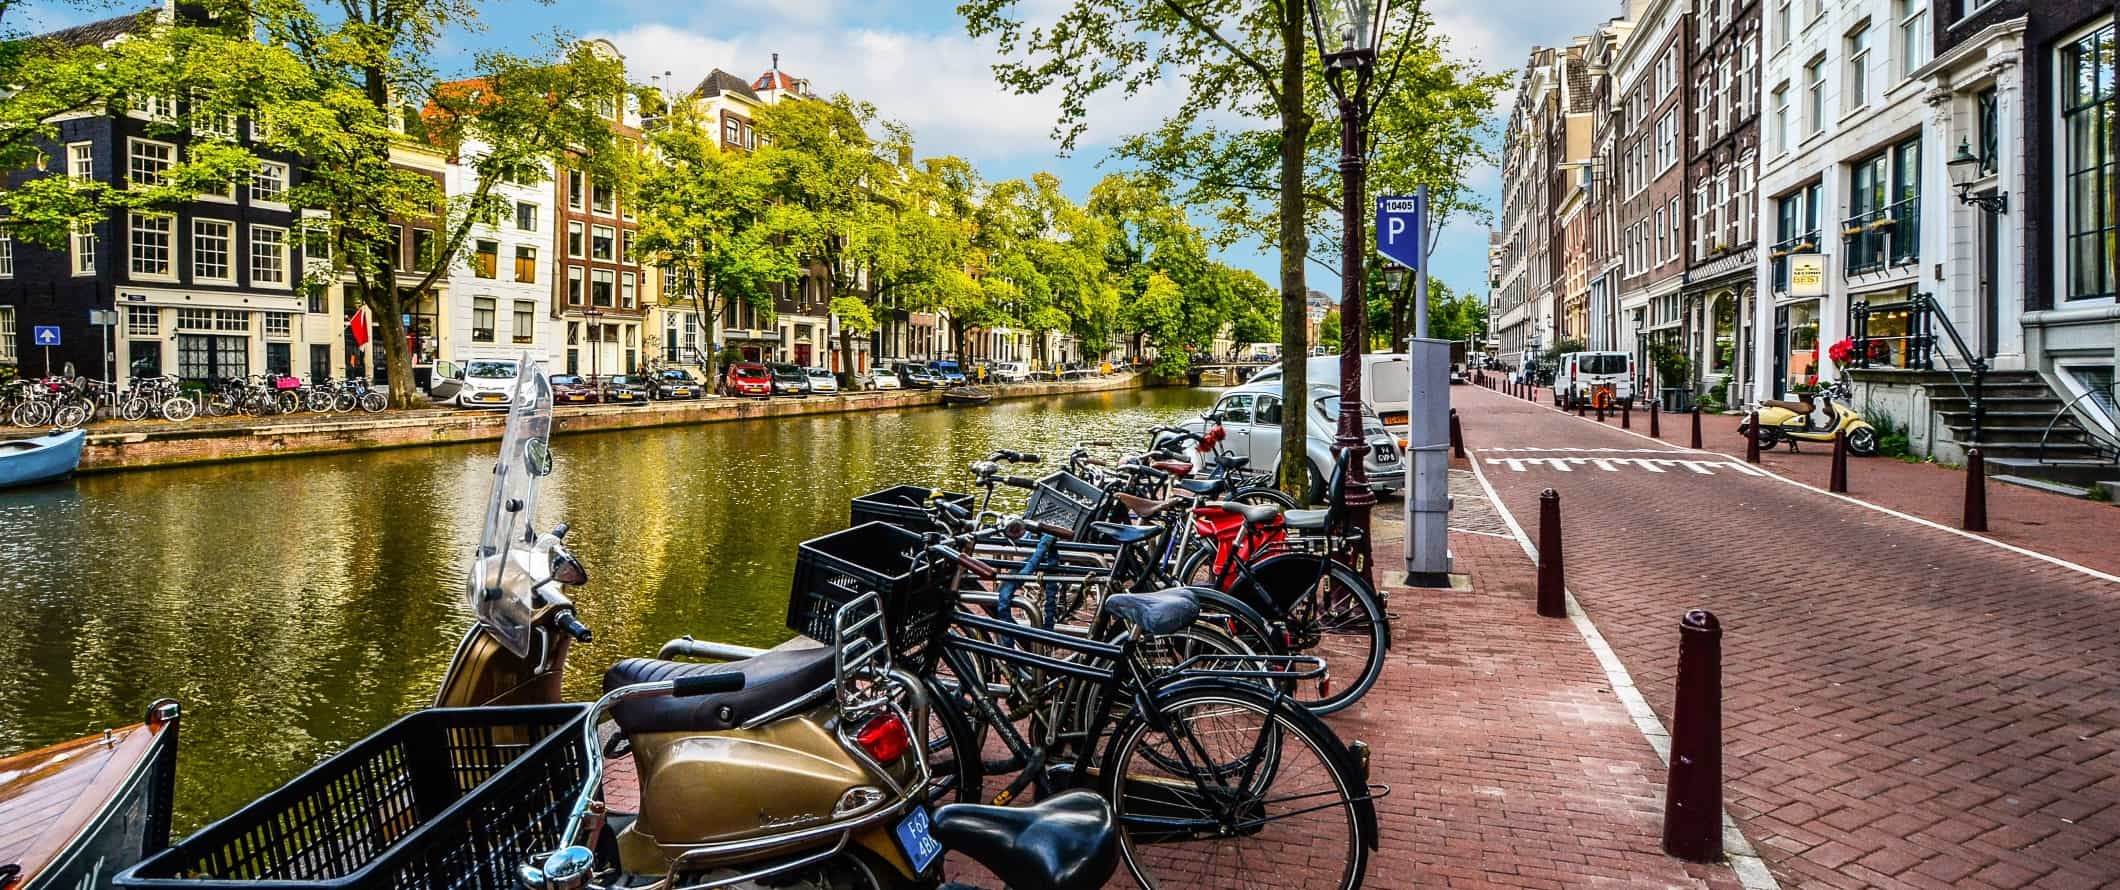 Cluster of bikes locked up along a canal in Amsterdam, the Netherlands.